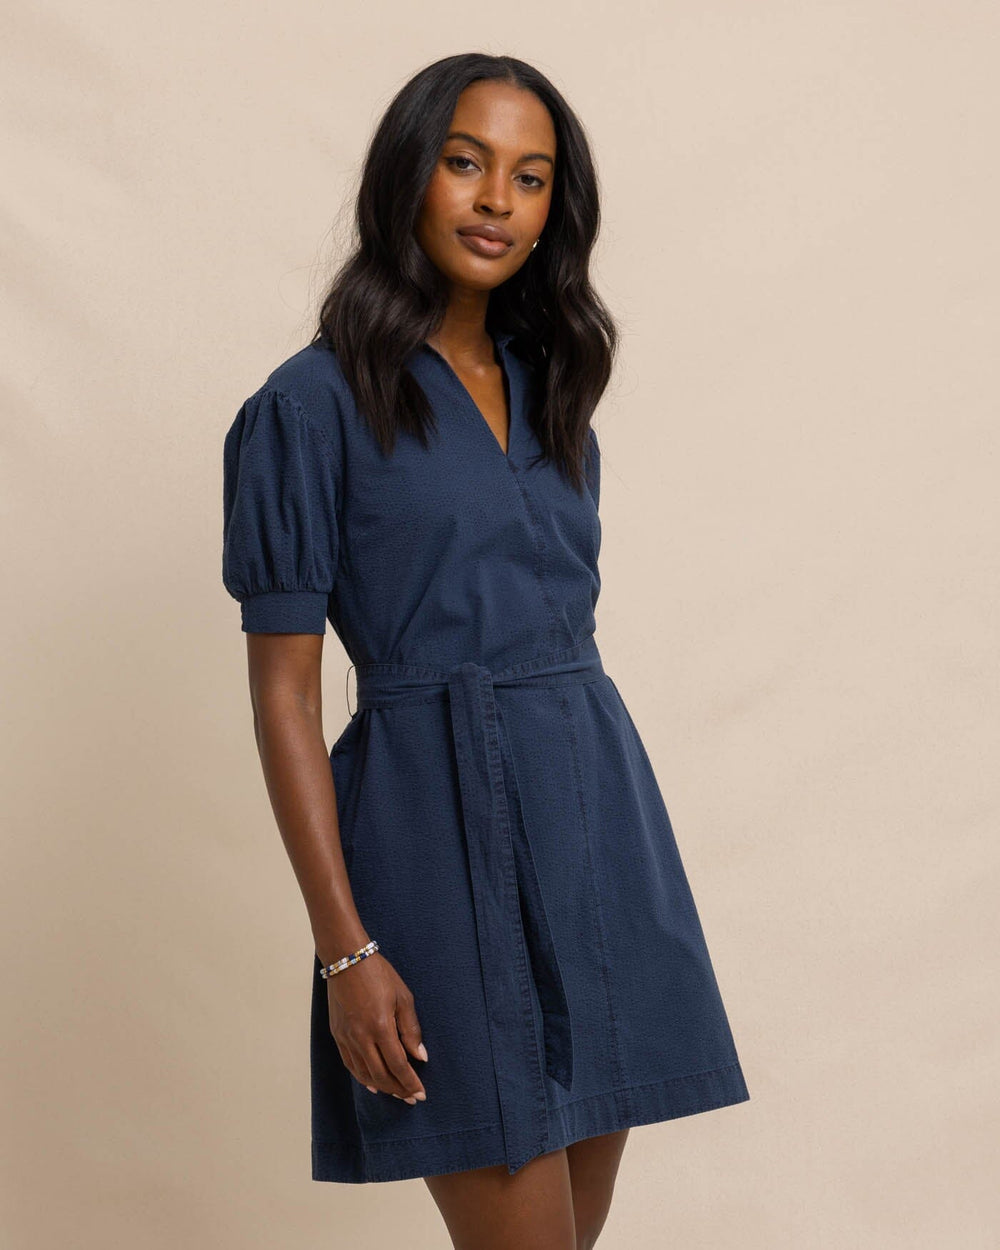 The front view of the Southern Tide Calan Washed Seersucker Dress by Southern Tide - Dress Blue